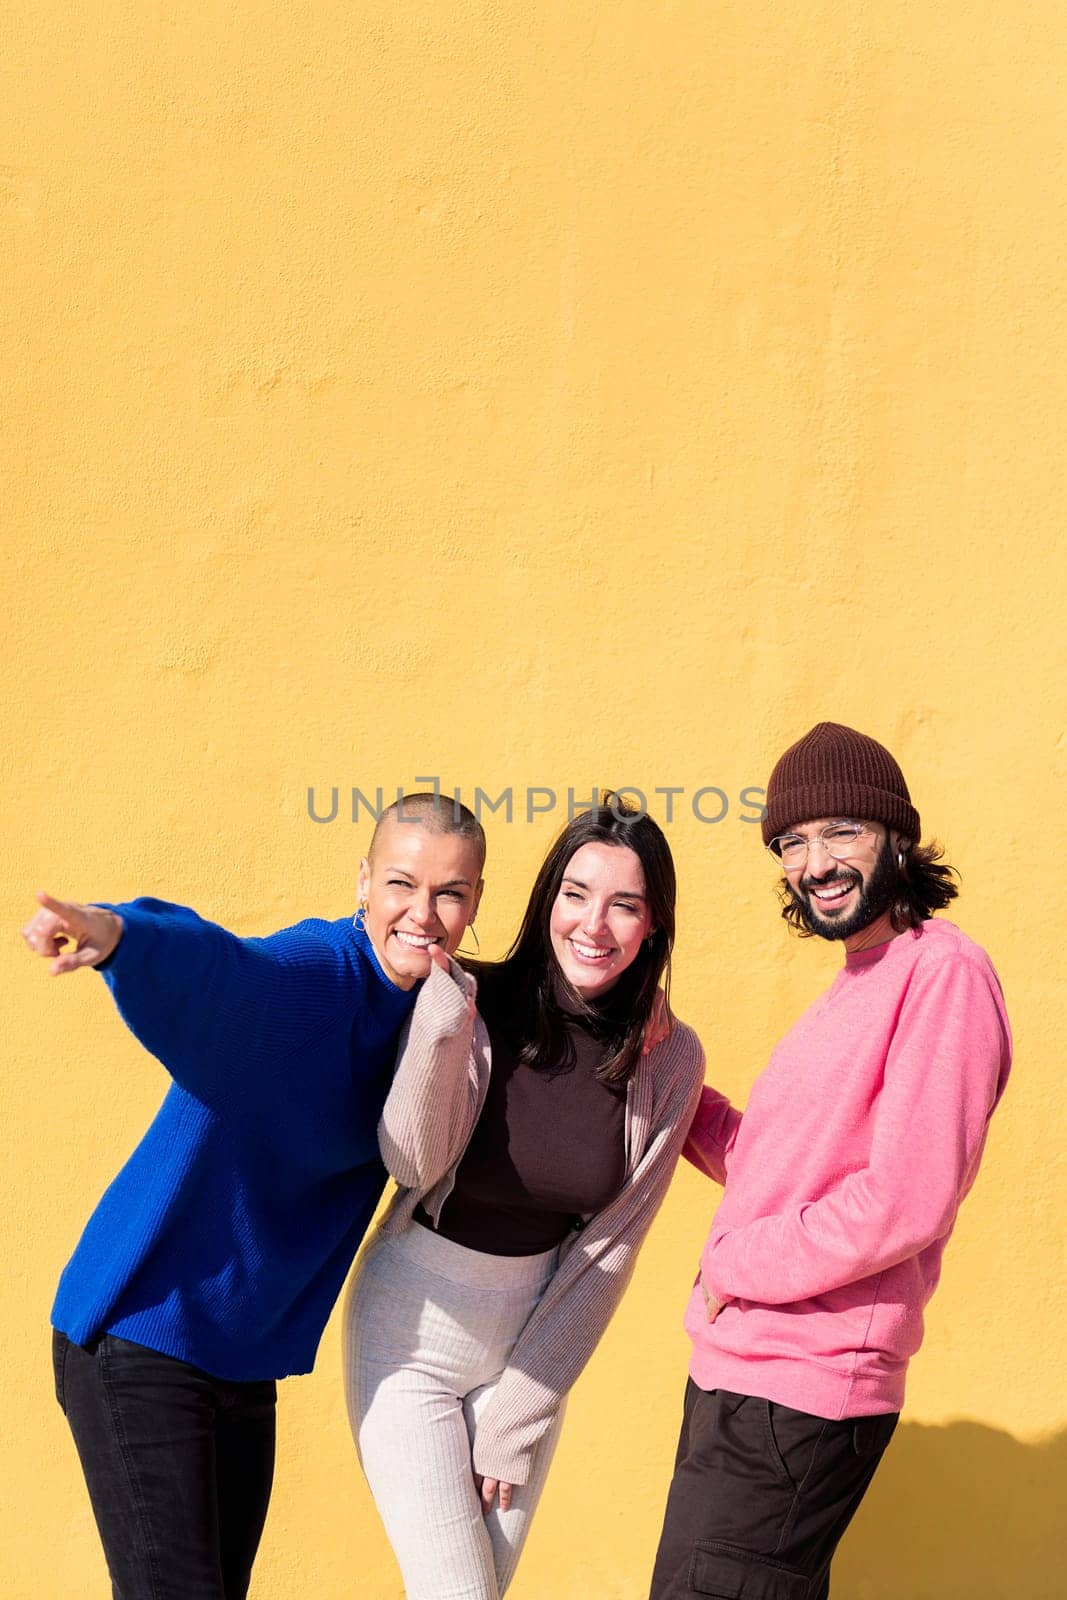 joyful young people pointing and having fun together on yellow background, concept of friendship and happiness, copy space for text